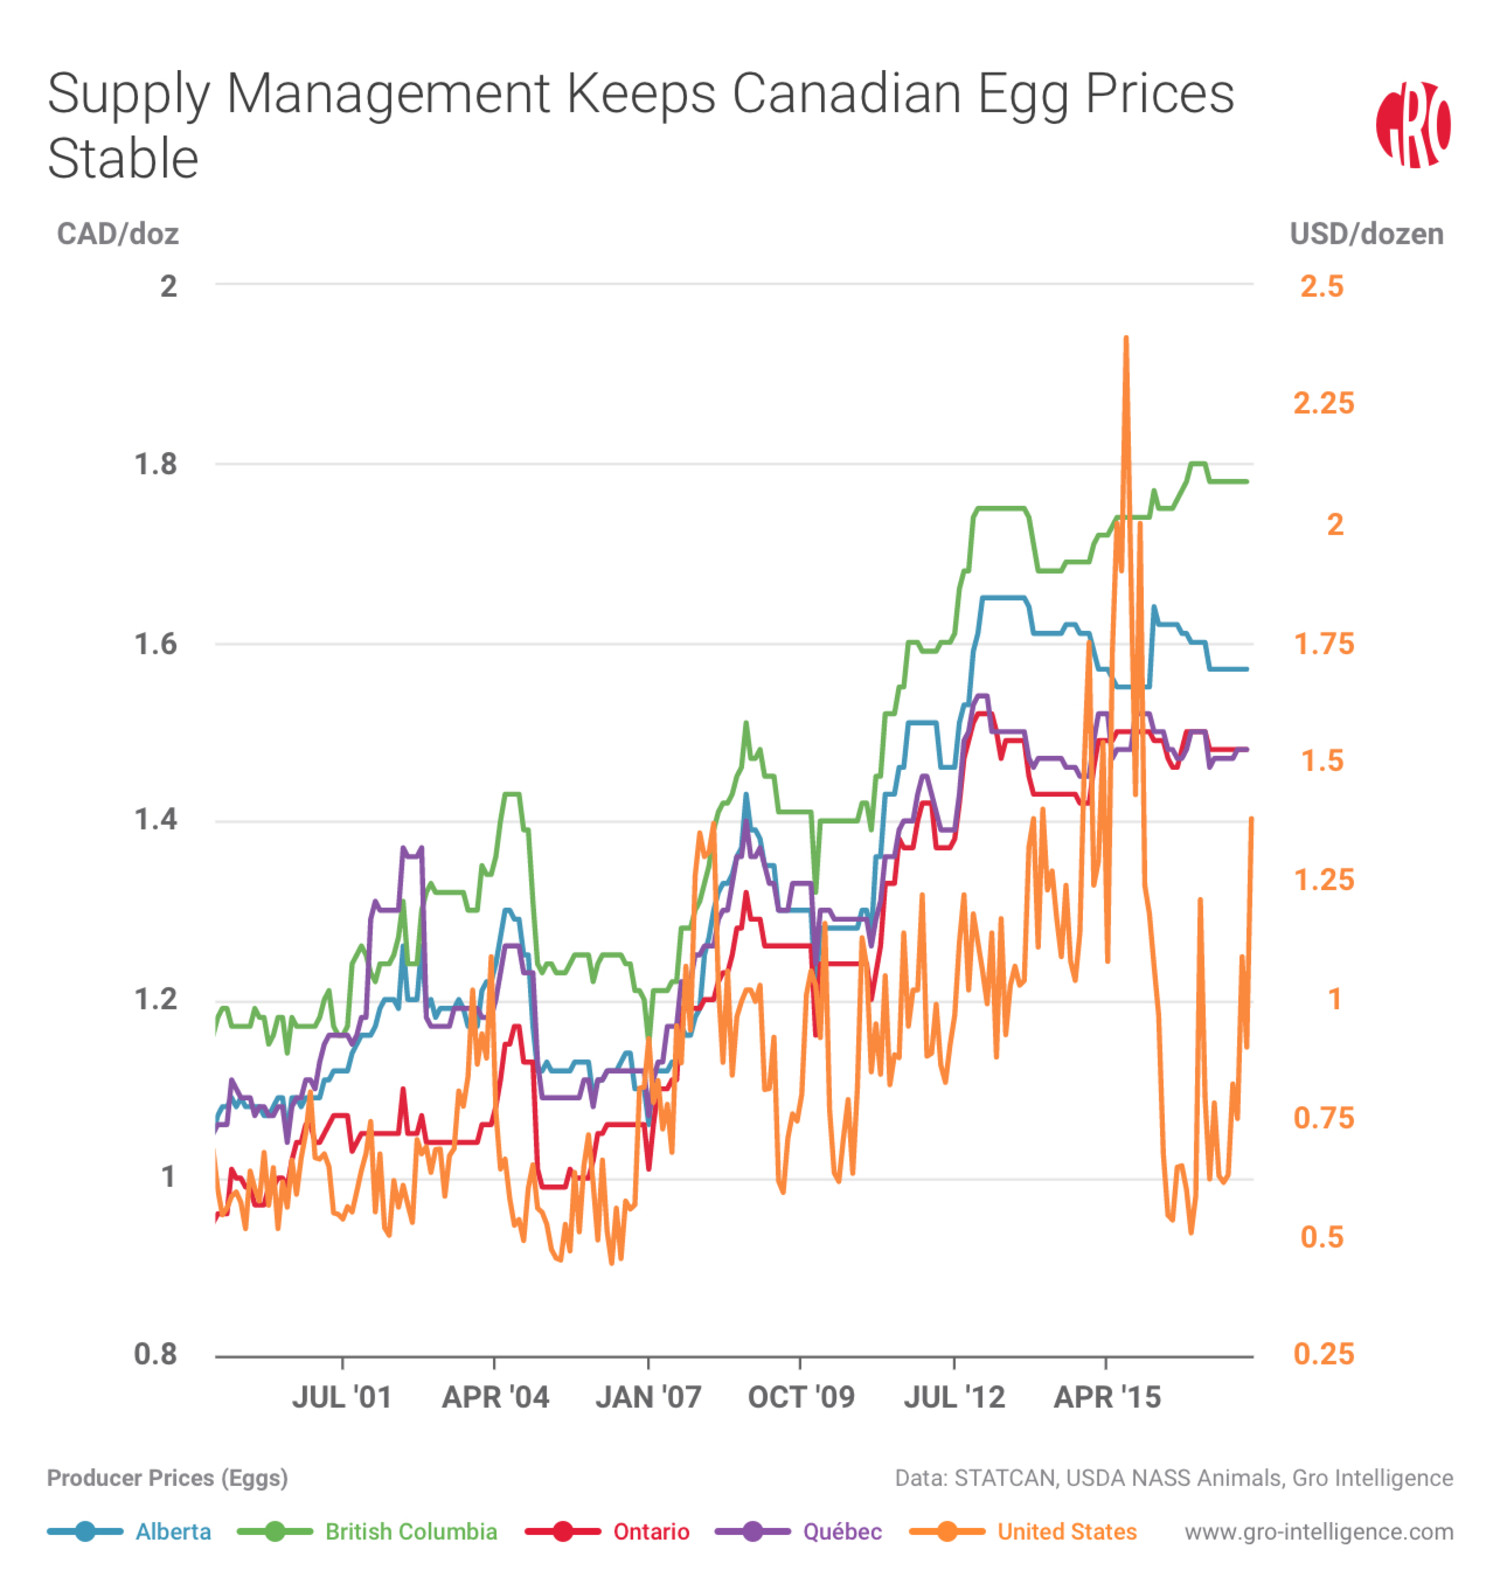 Supply Management Keeps Canadian Egg Prices Stable